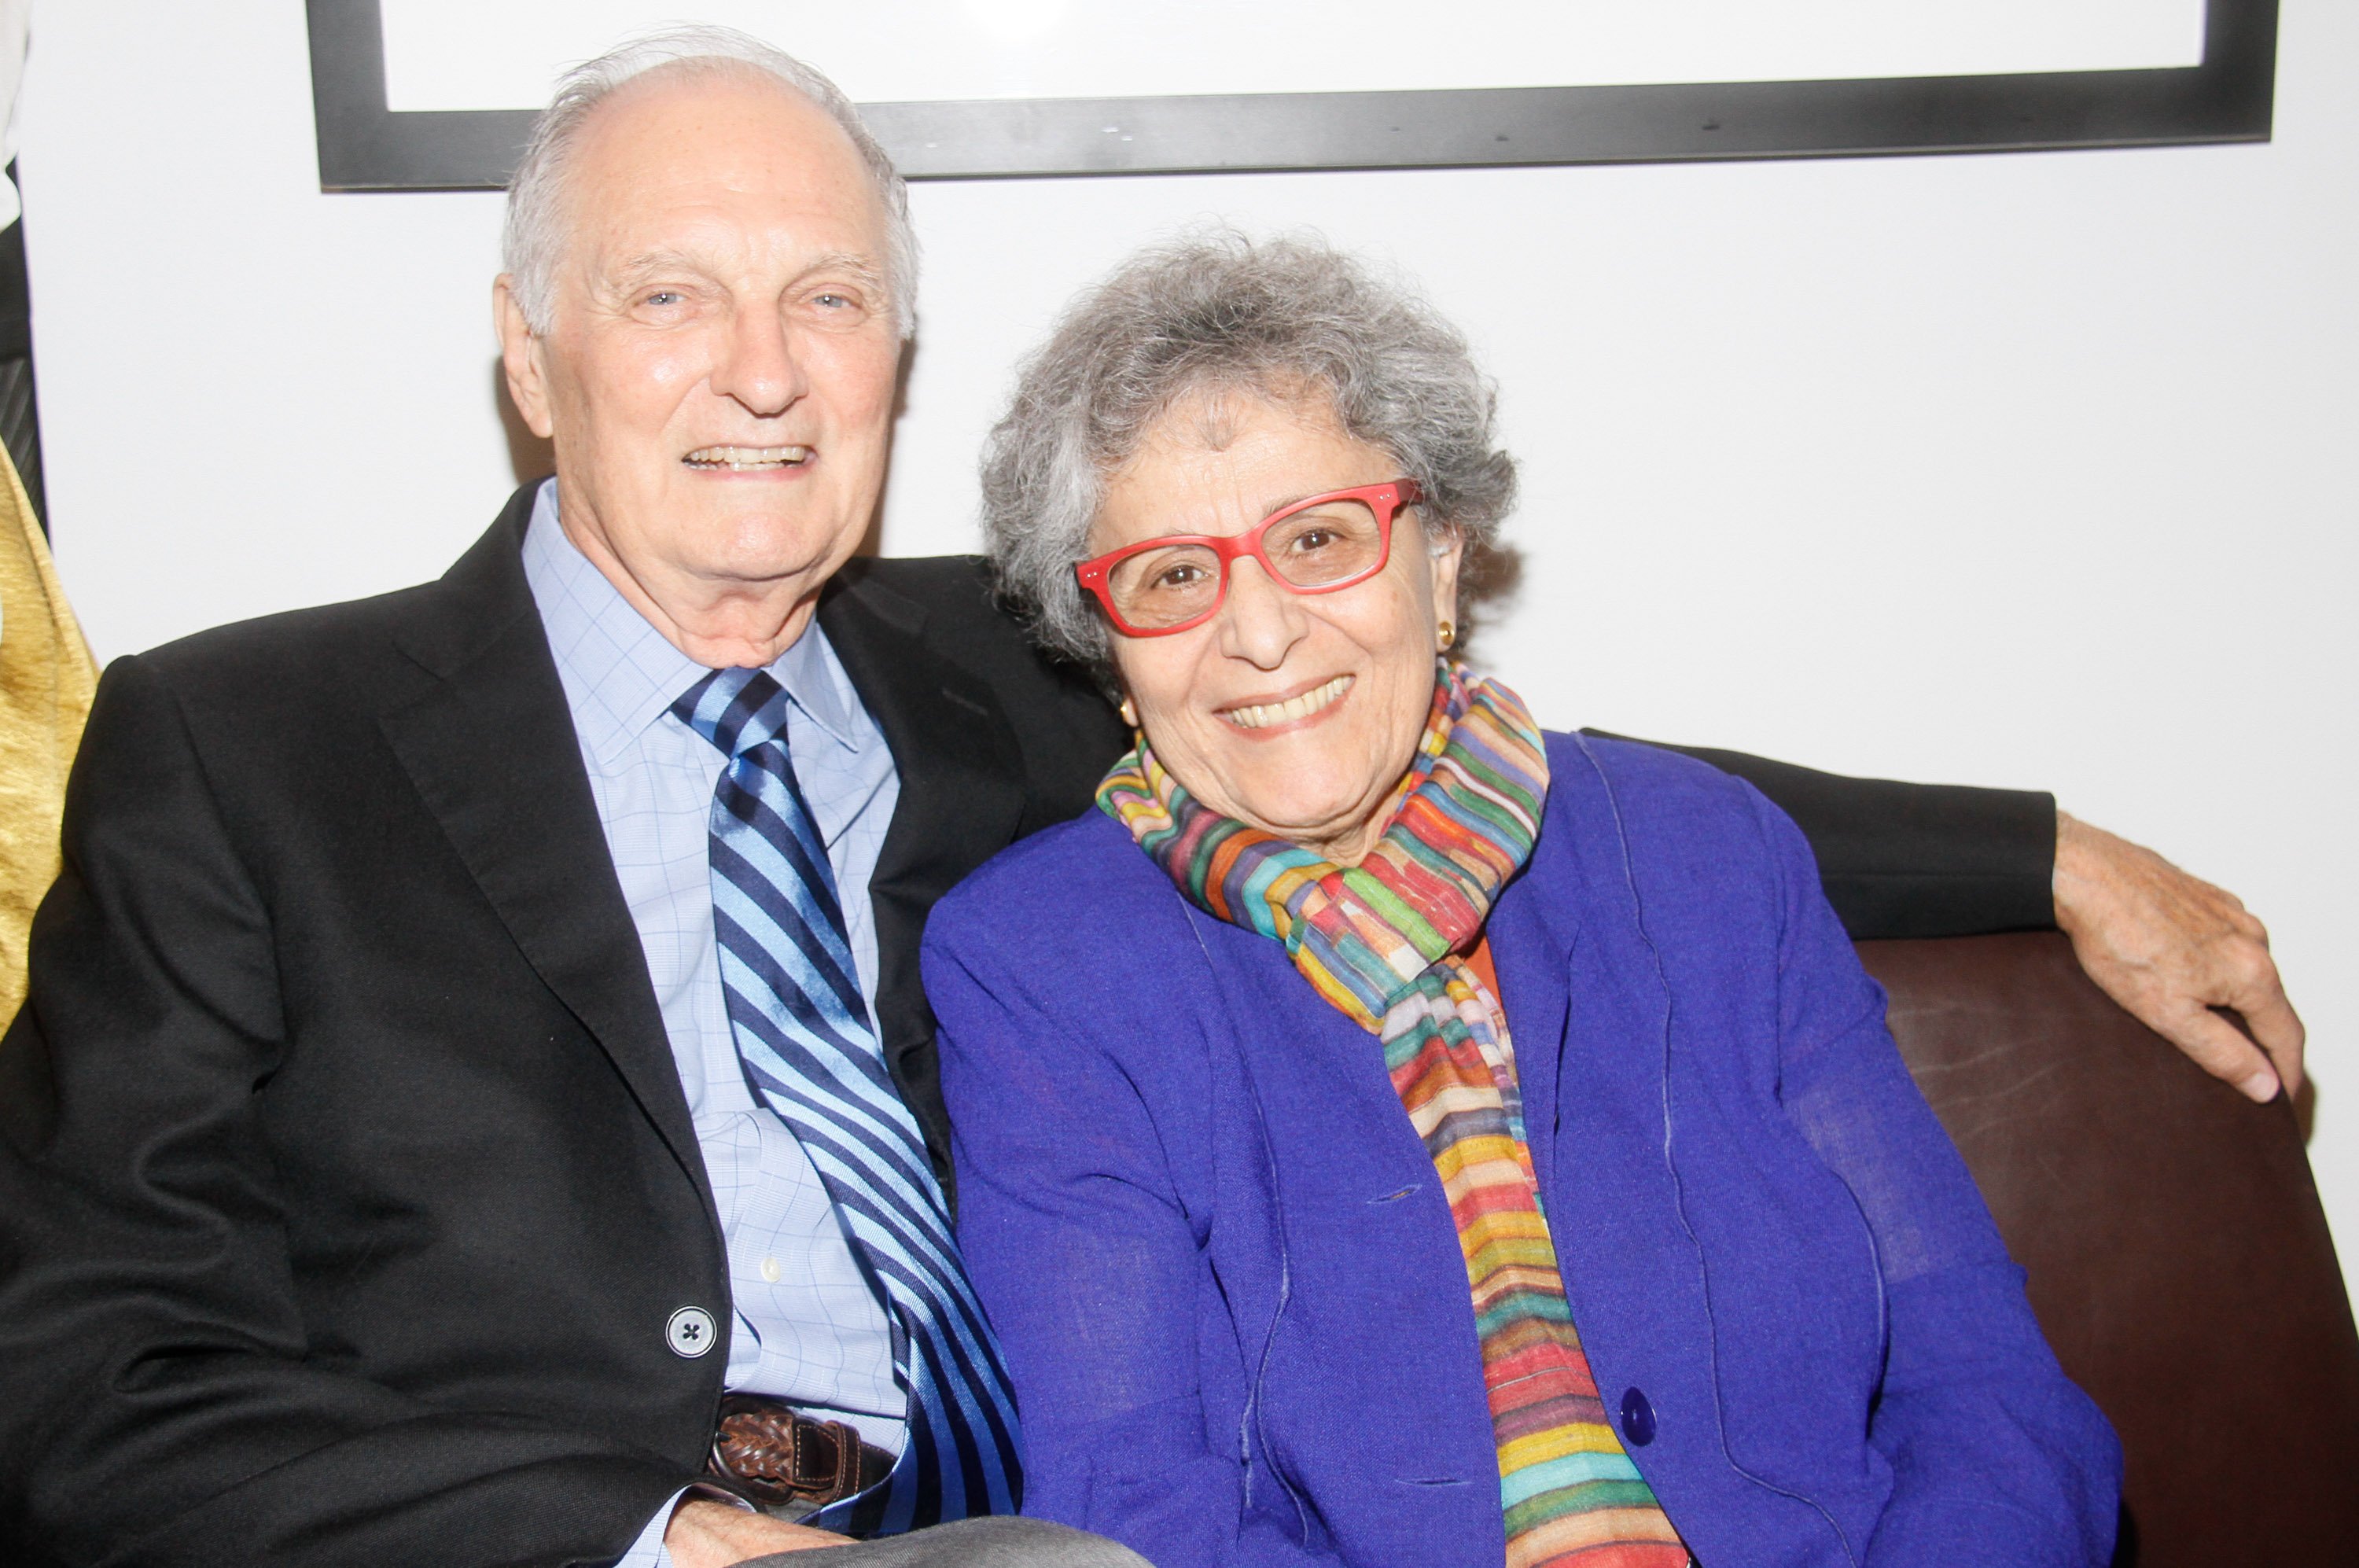 Alan Alda and Arlene Alda attend the premiere screening of the HBO Special Alan Alda: YoungArts MasterClass With Discussion By Alda And YoungArts Alumni on September 5, 2014 in New York City ┃Source: Getty Images